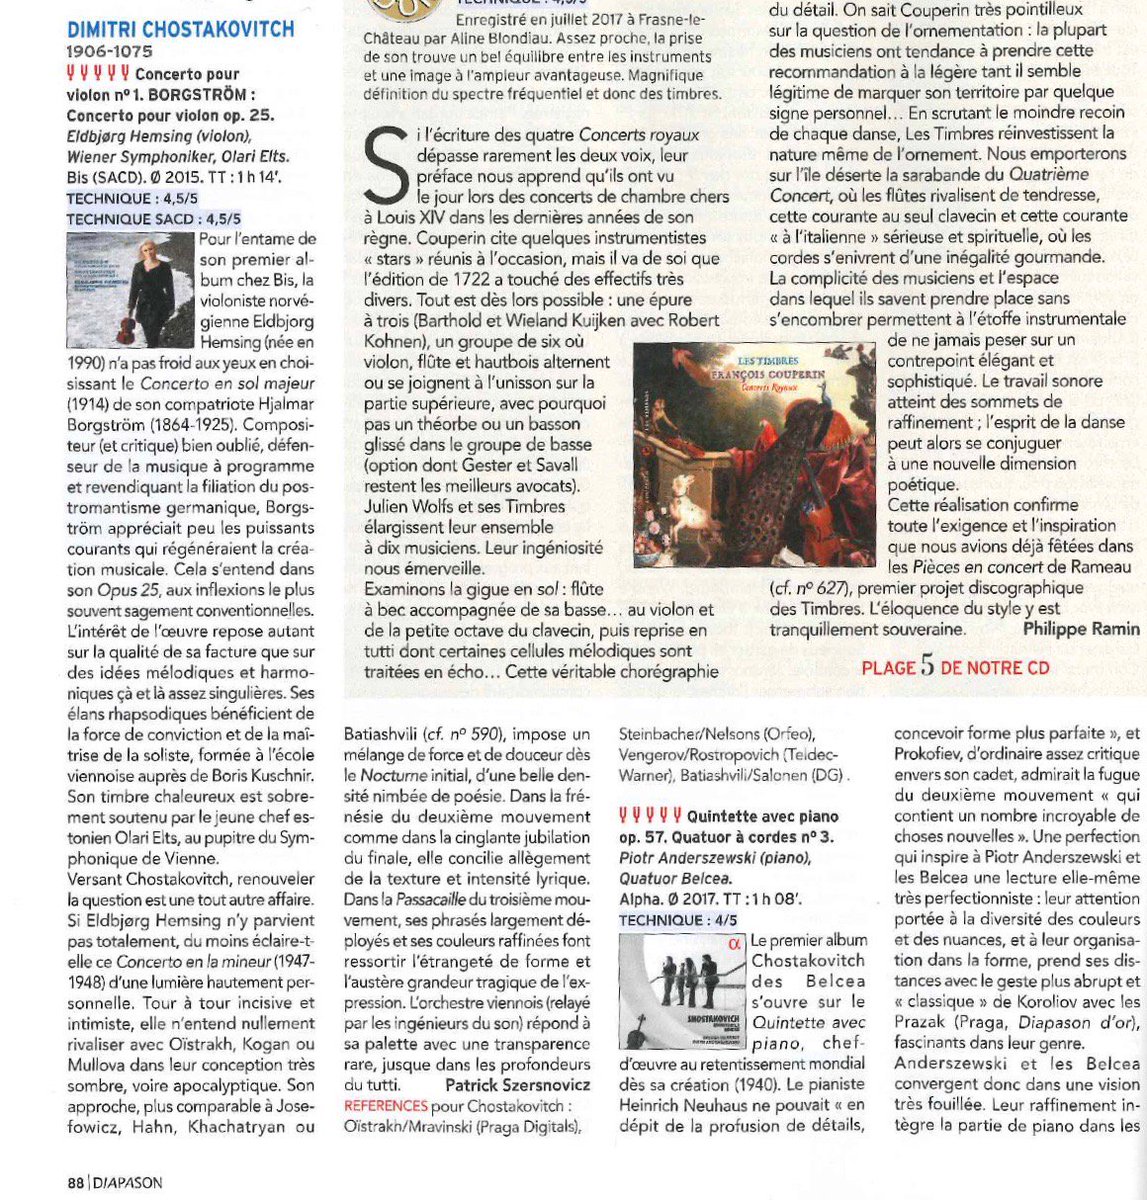 Another 5 stars review! This time with @EldbjorgHemsing and @viennasymphony in @Diapasonmag